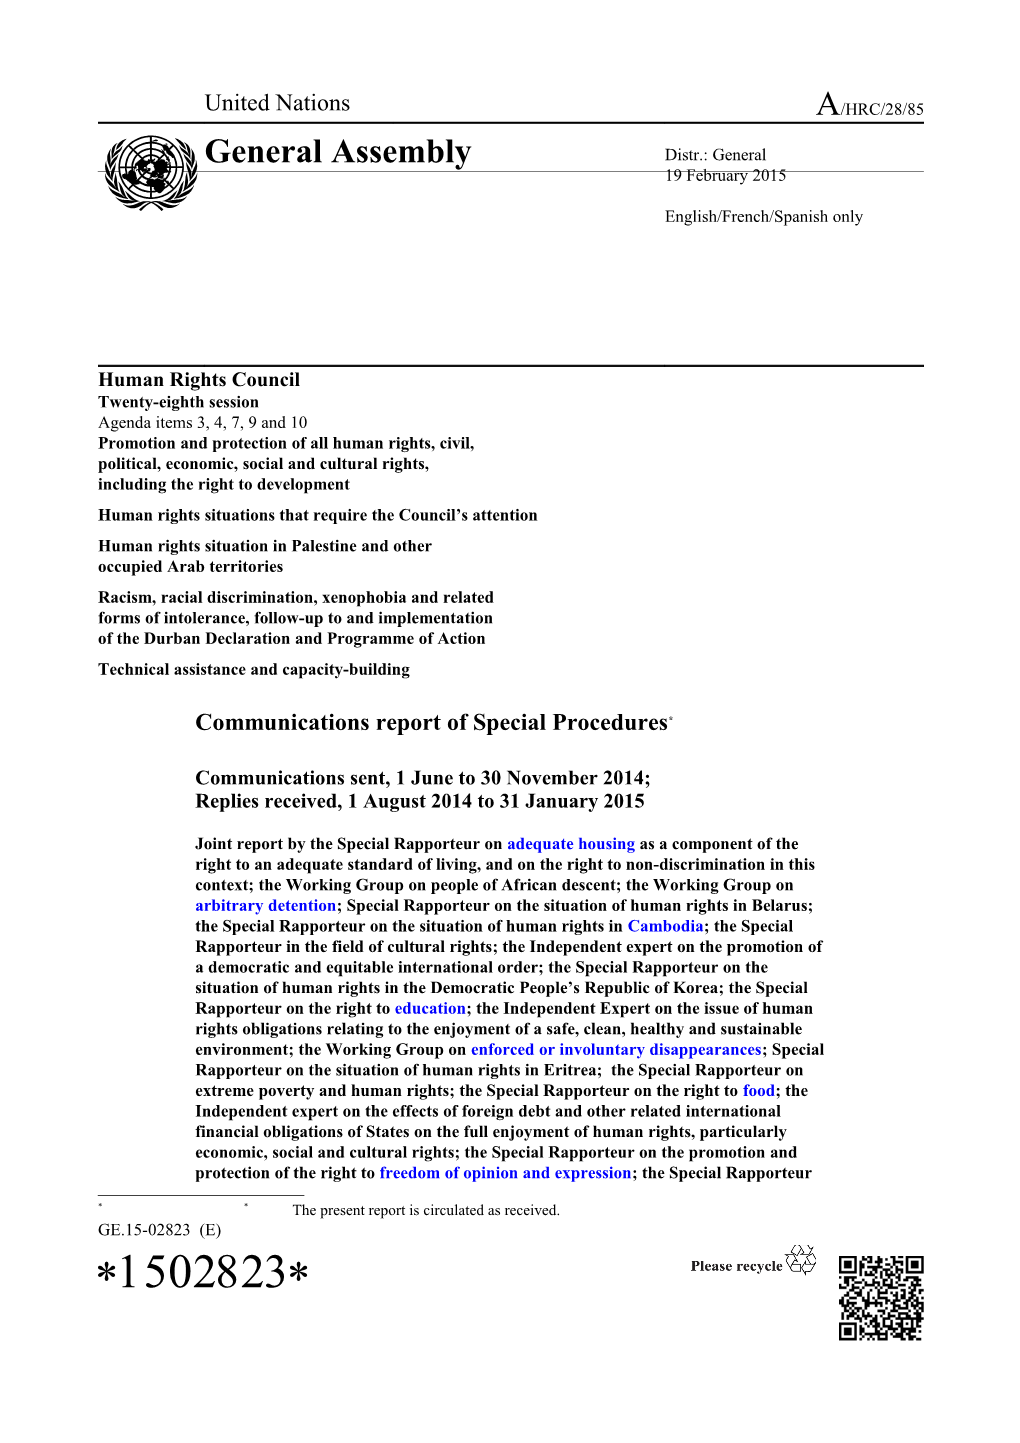 Communications Report of Special Procedures in English, French and Spanish